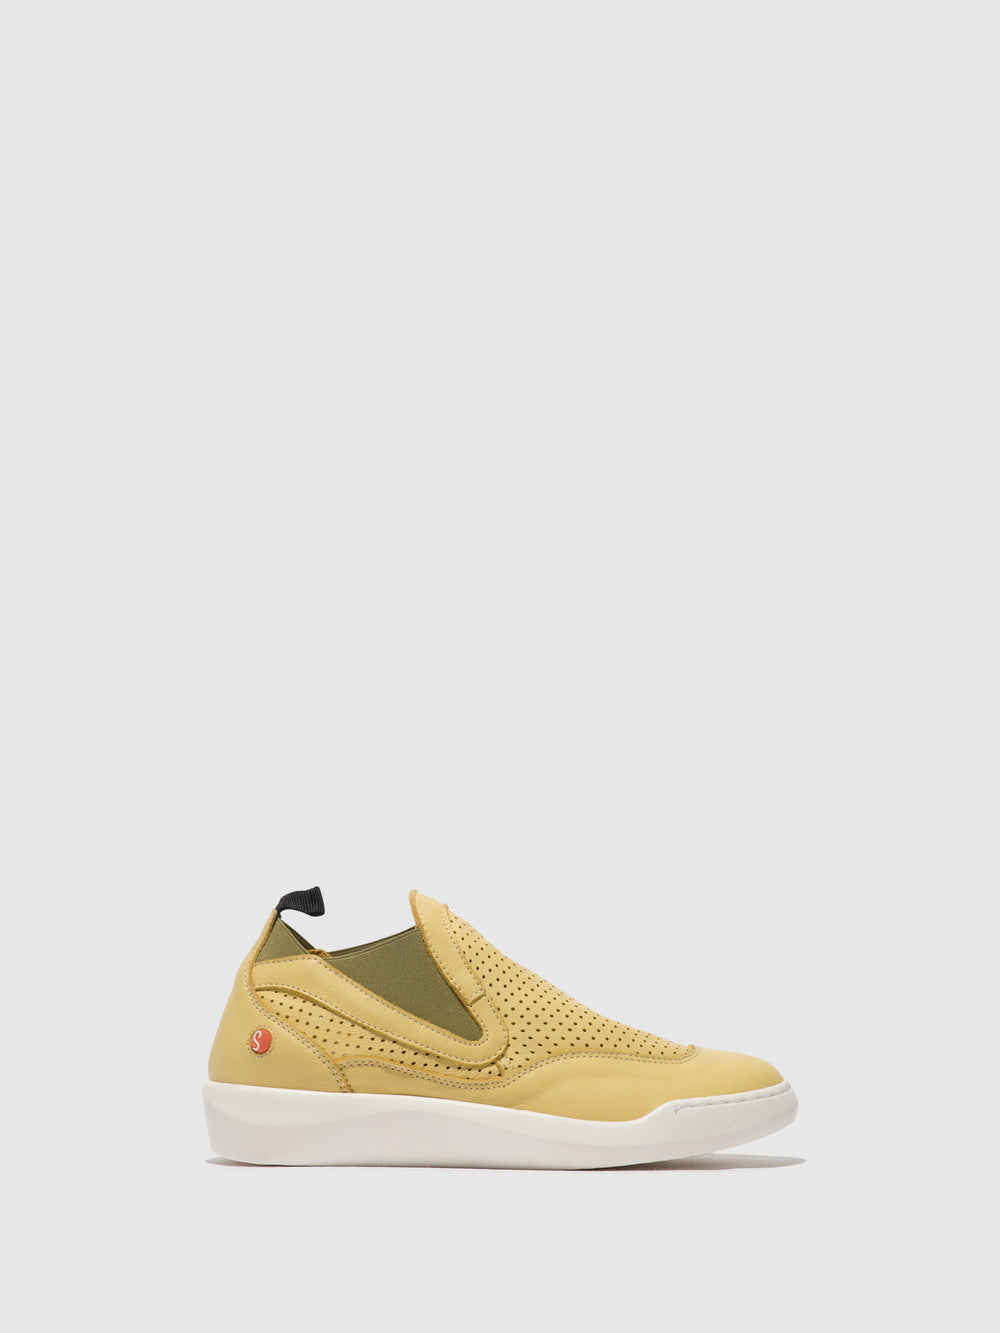 Slip-on Shoes BRAY721SOF LIGHT YELLOW/OLIVE